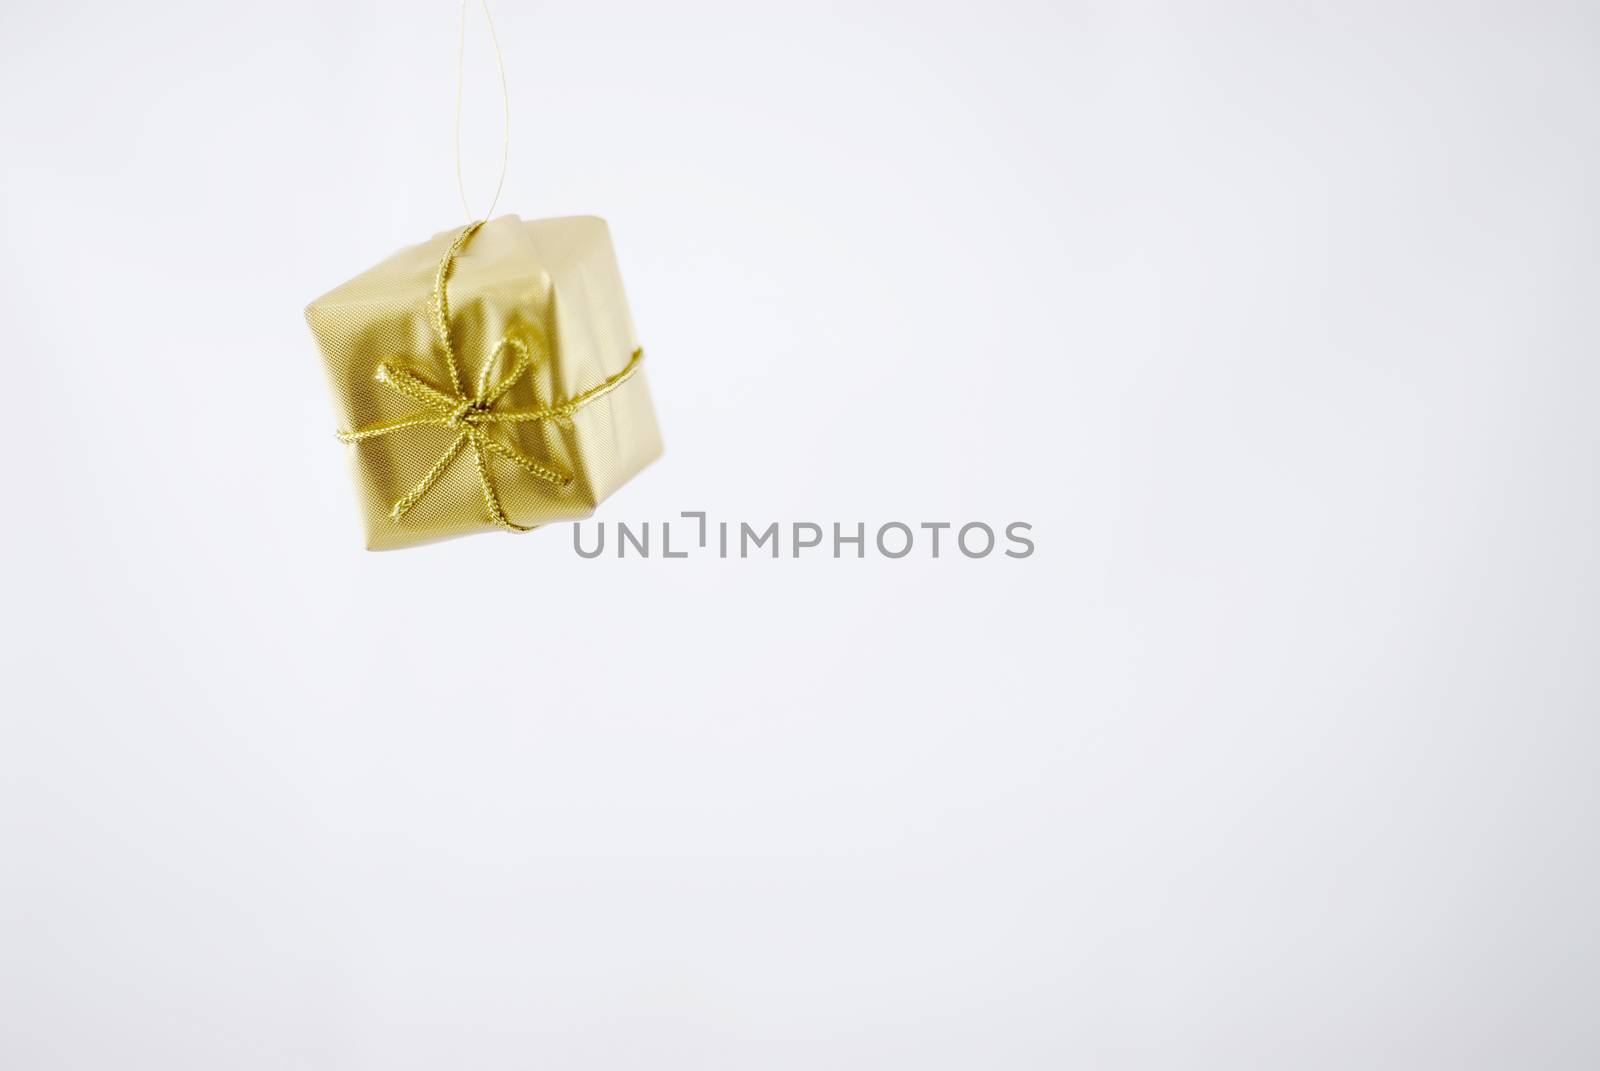 Modern, bright and shiny Christmas decorations on white background